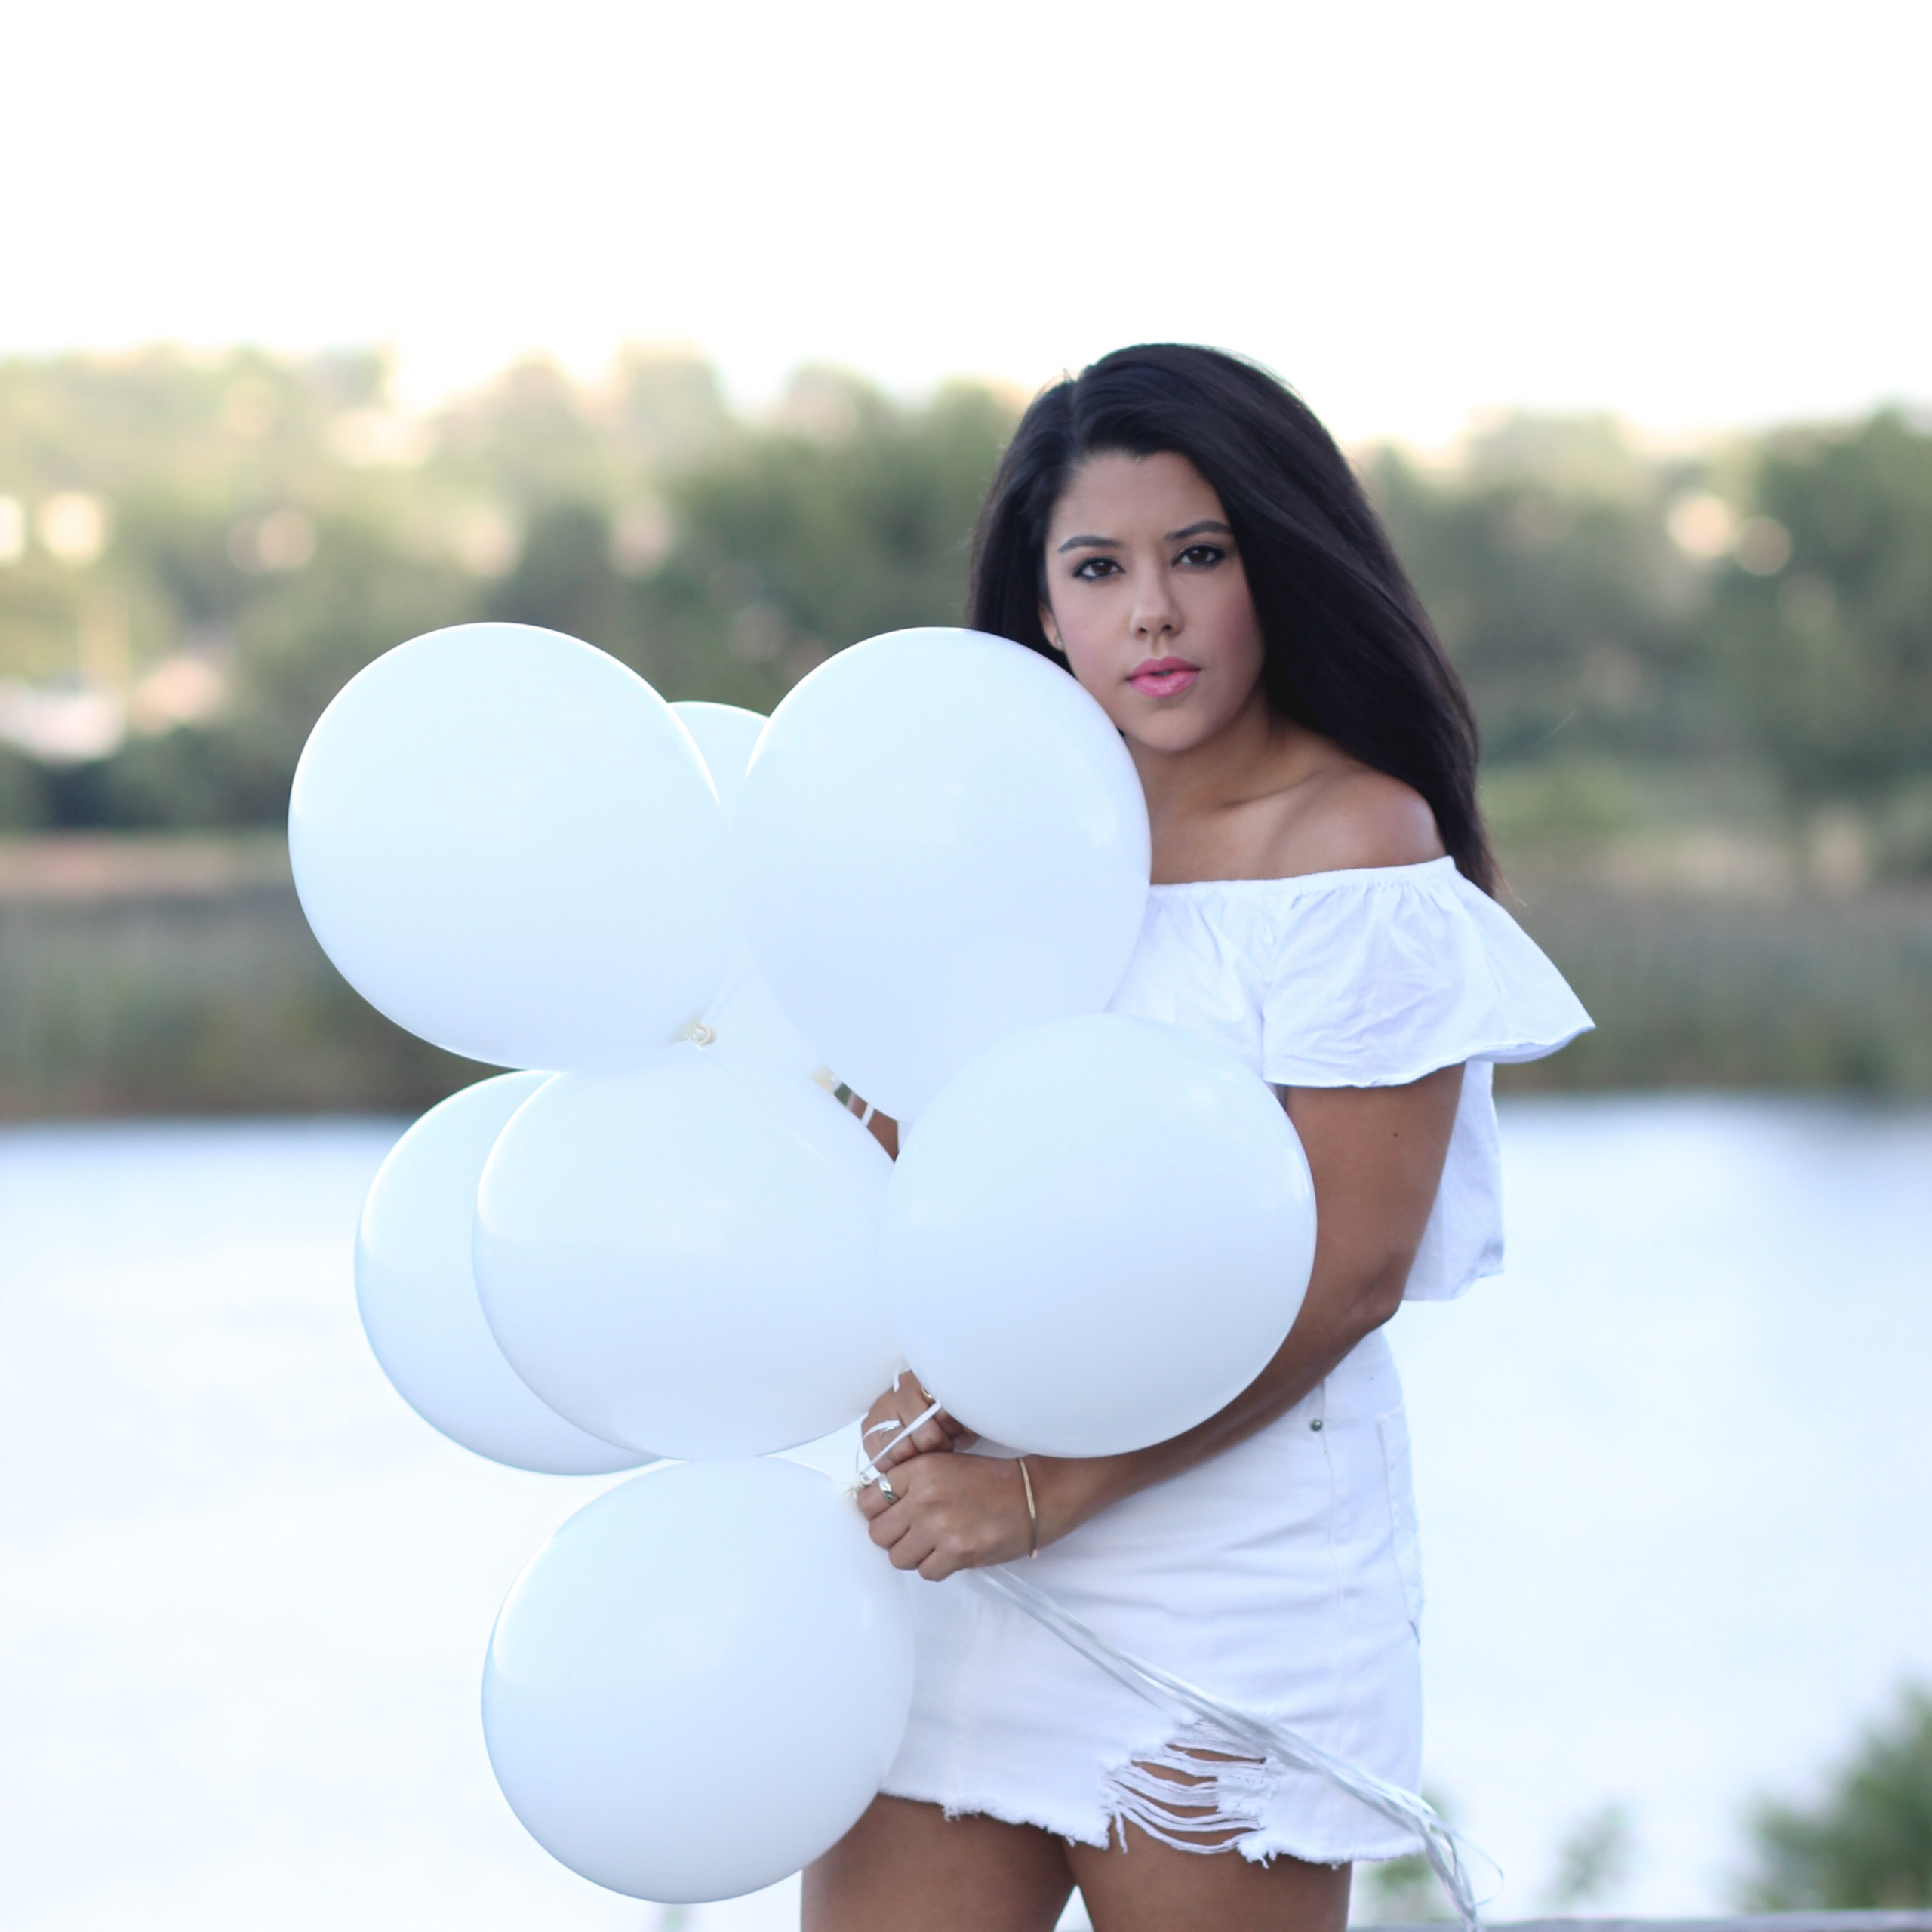 style blogger naty michele wearing all white and holding white balloons